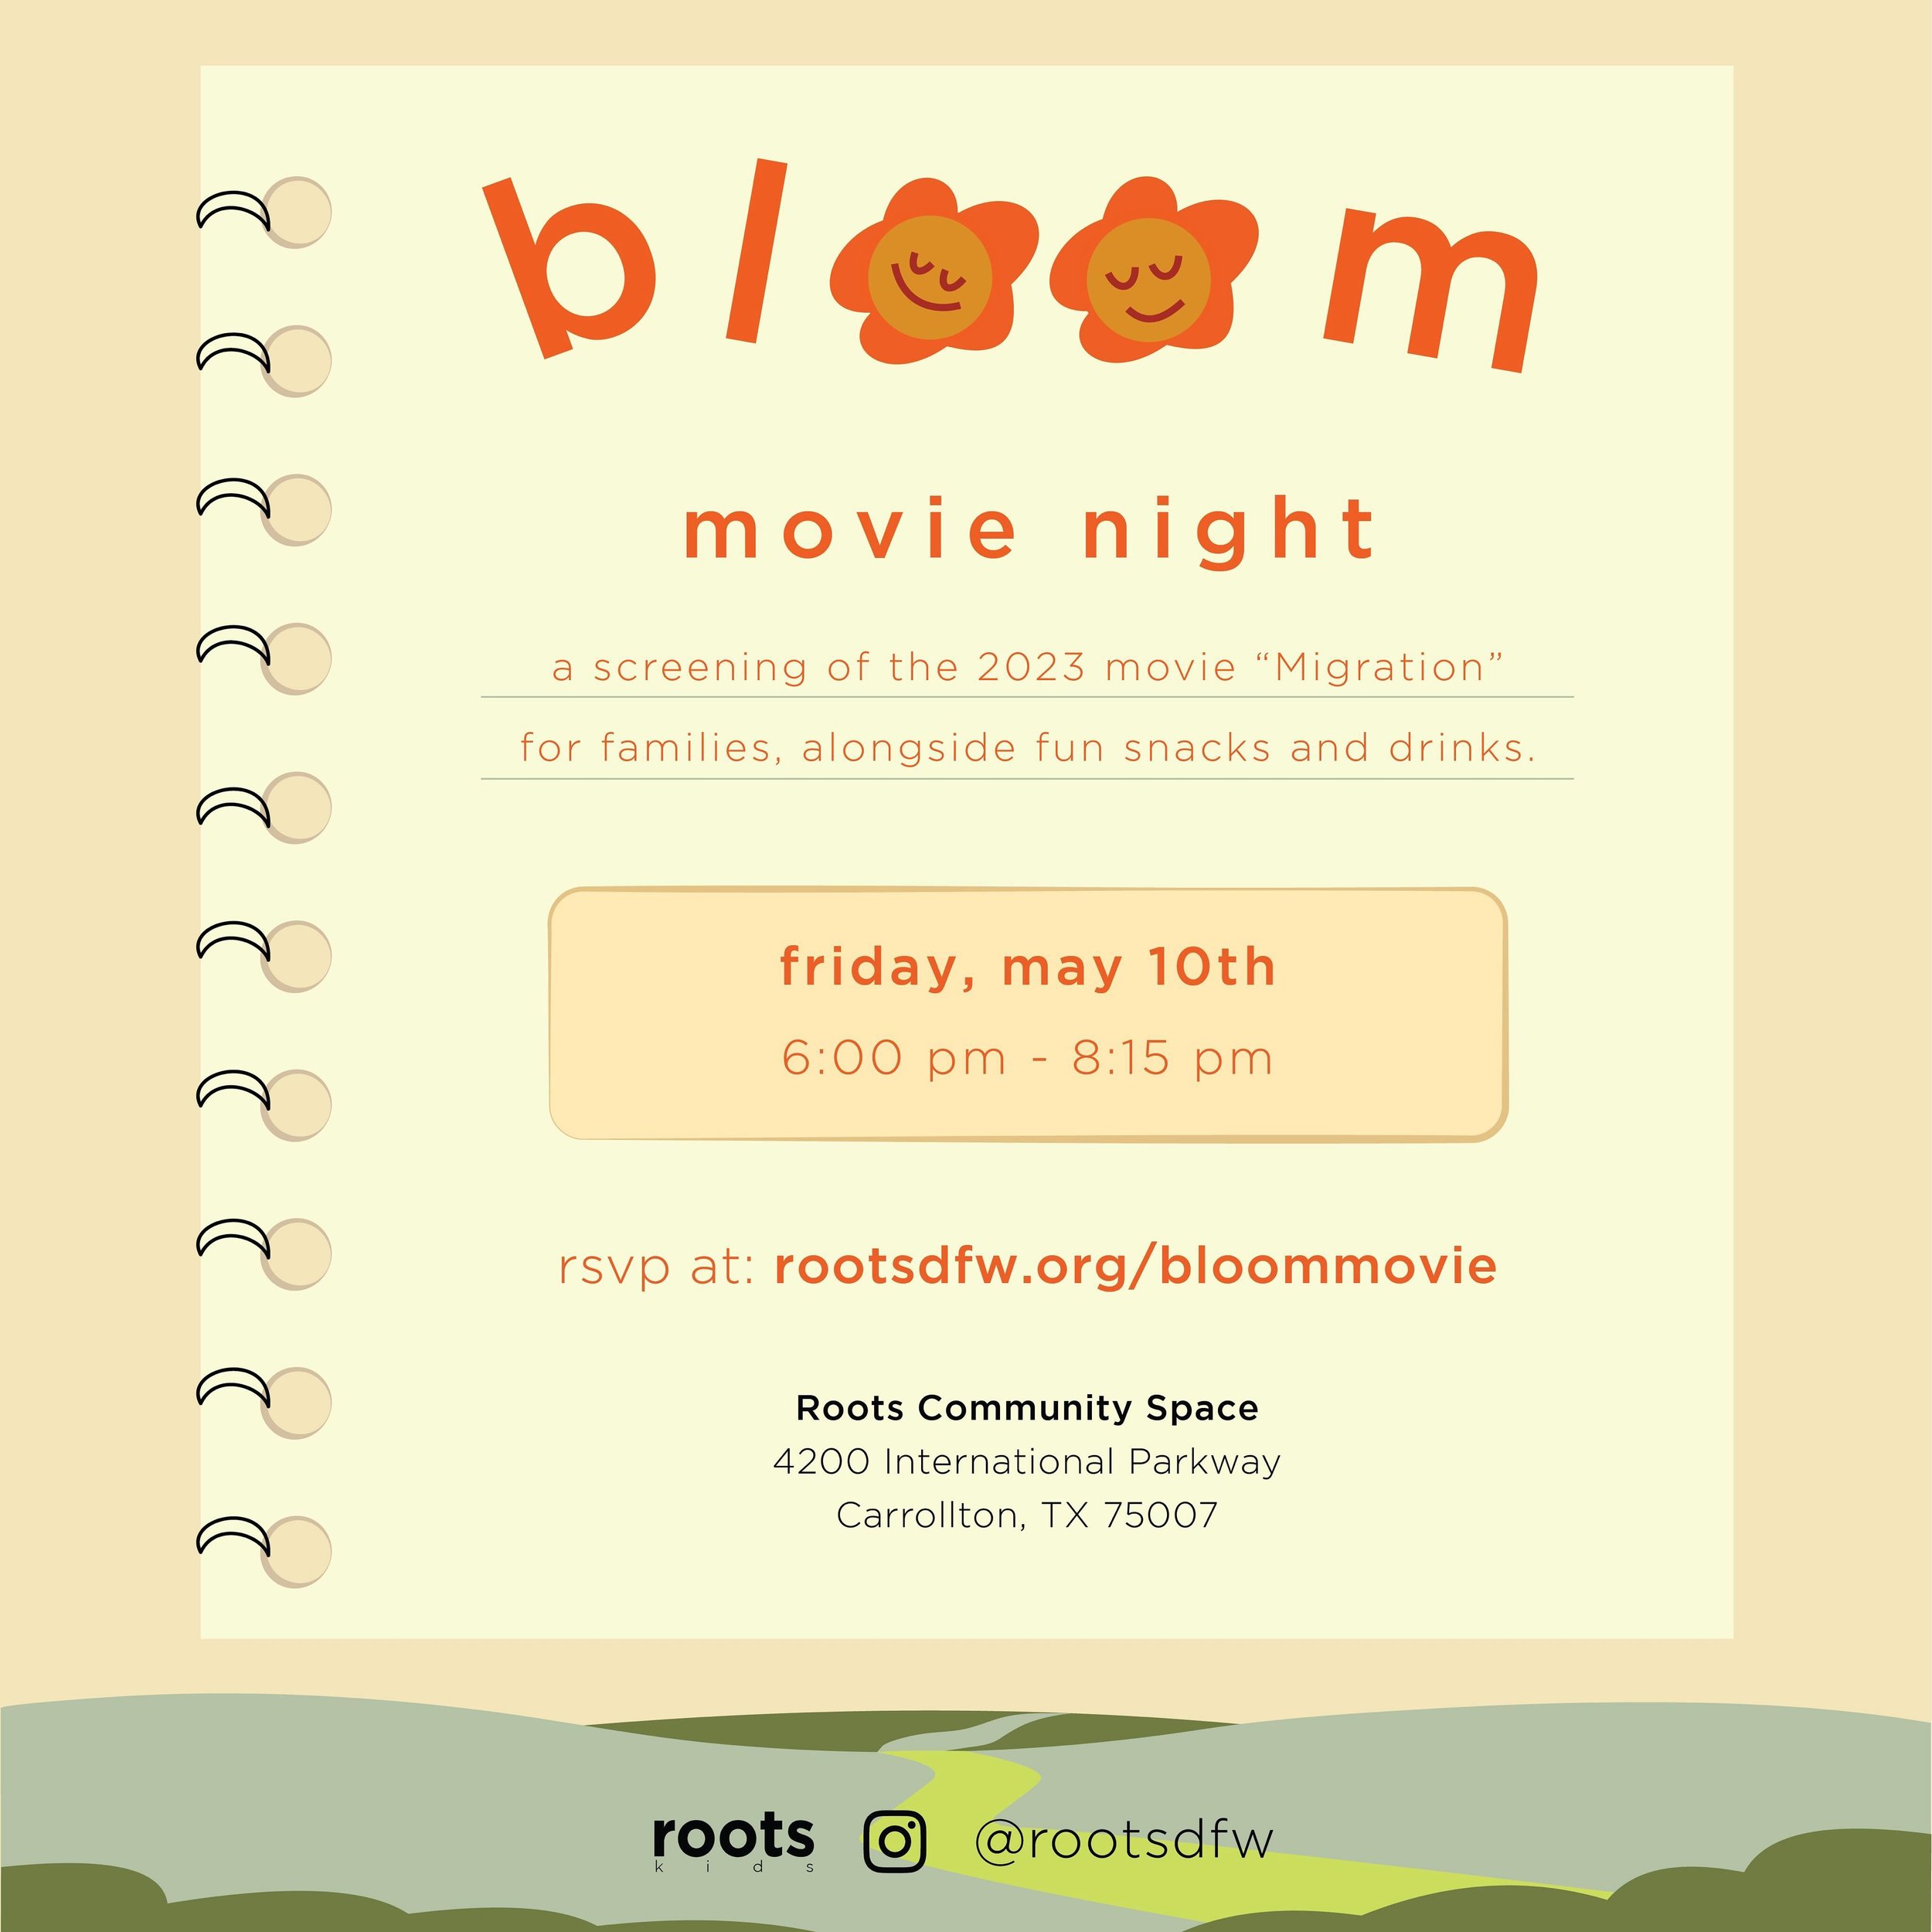 Roots Community! Join our Bloom family with your children on Friday evening for a fun movie night featuring the film: Migration (2023). We will be serving movie snacks for kids along with chai for parents. This program is open to all! Please RSVP at: